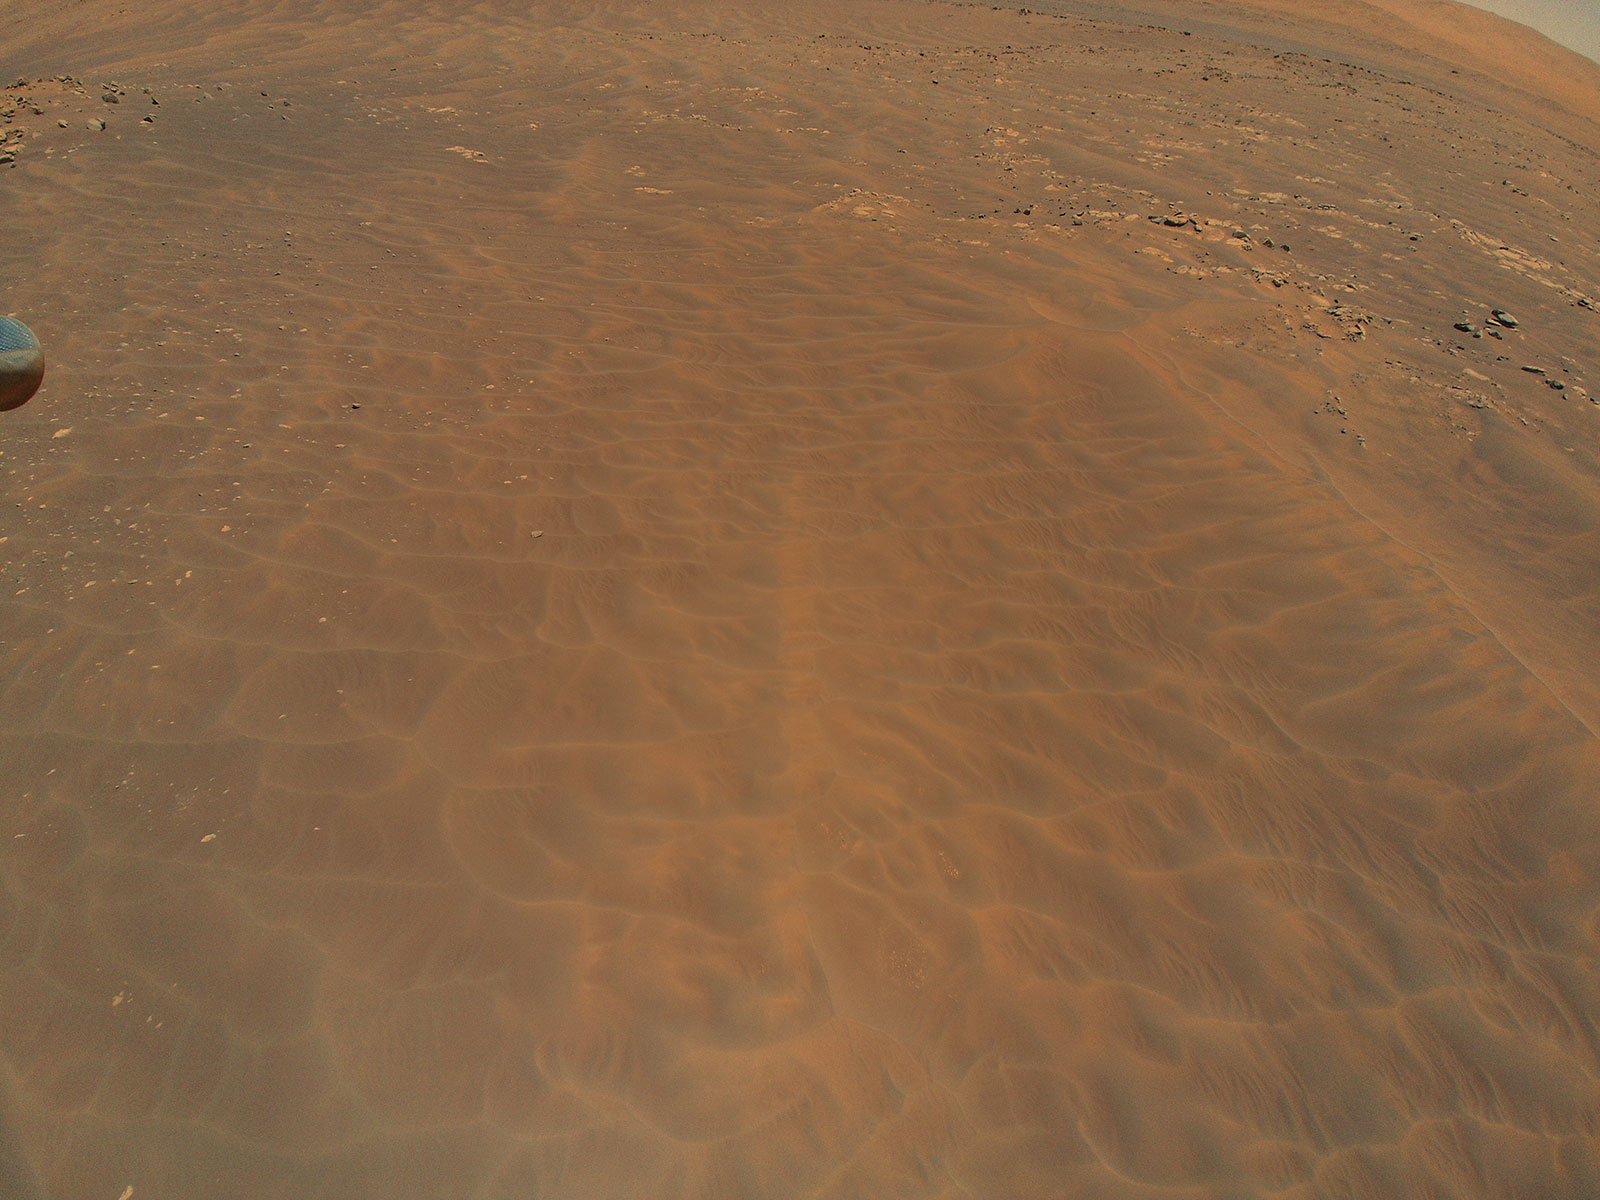 NASA’s Ingenuity Mars Helicopter flew over this dune field in a region of Jezero Crater nicknamed “Séítah” during its ninth flight, on July 5, 2021. A portion of the helicopter’s landing gear can be seen at top left.